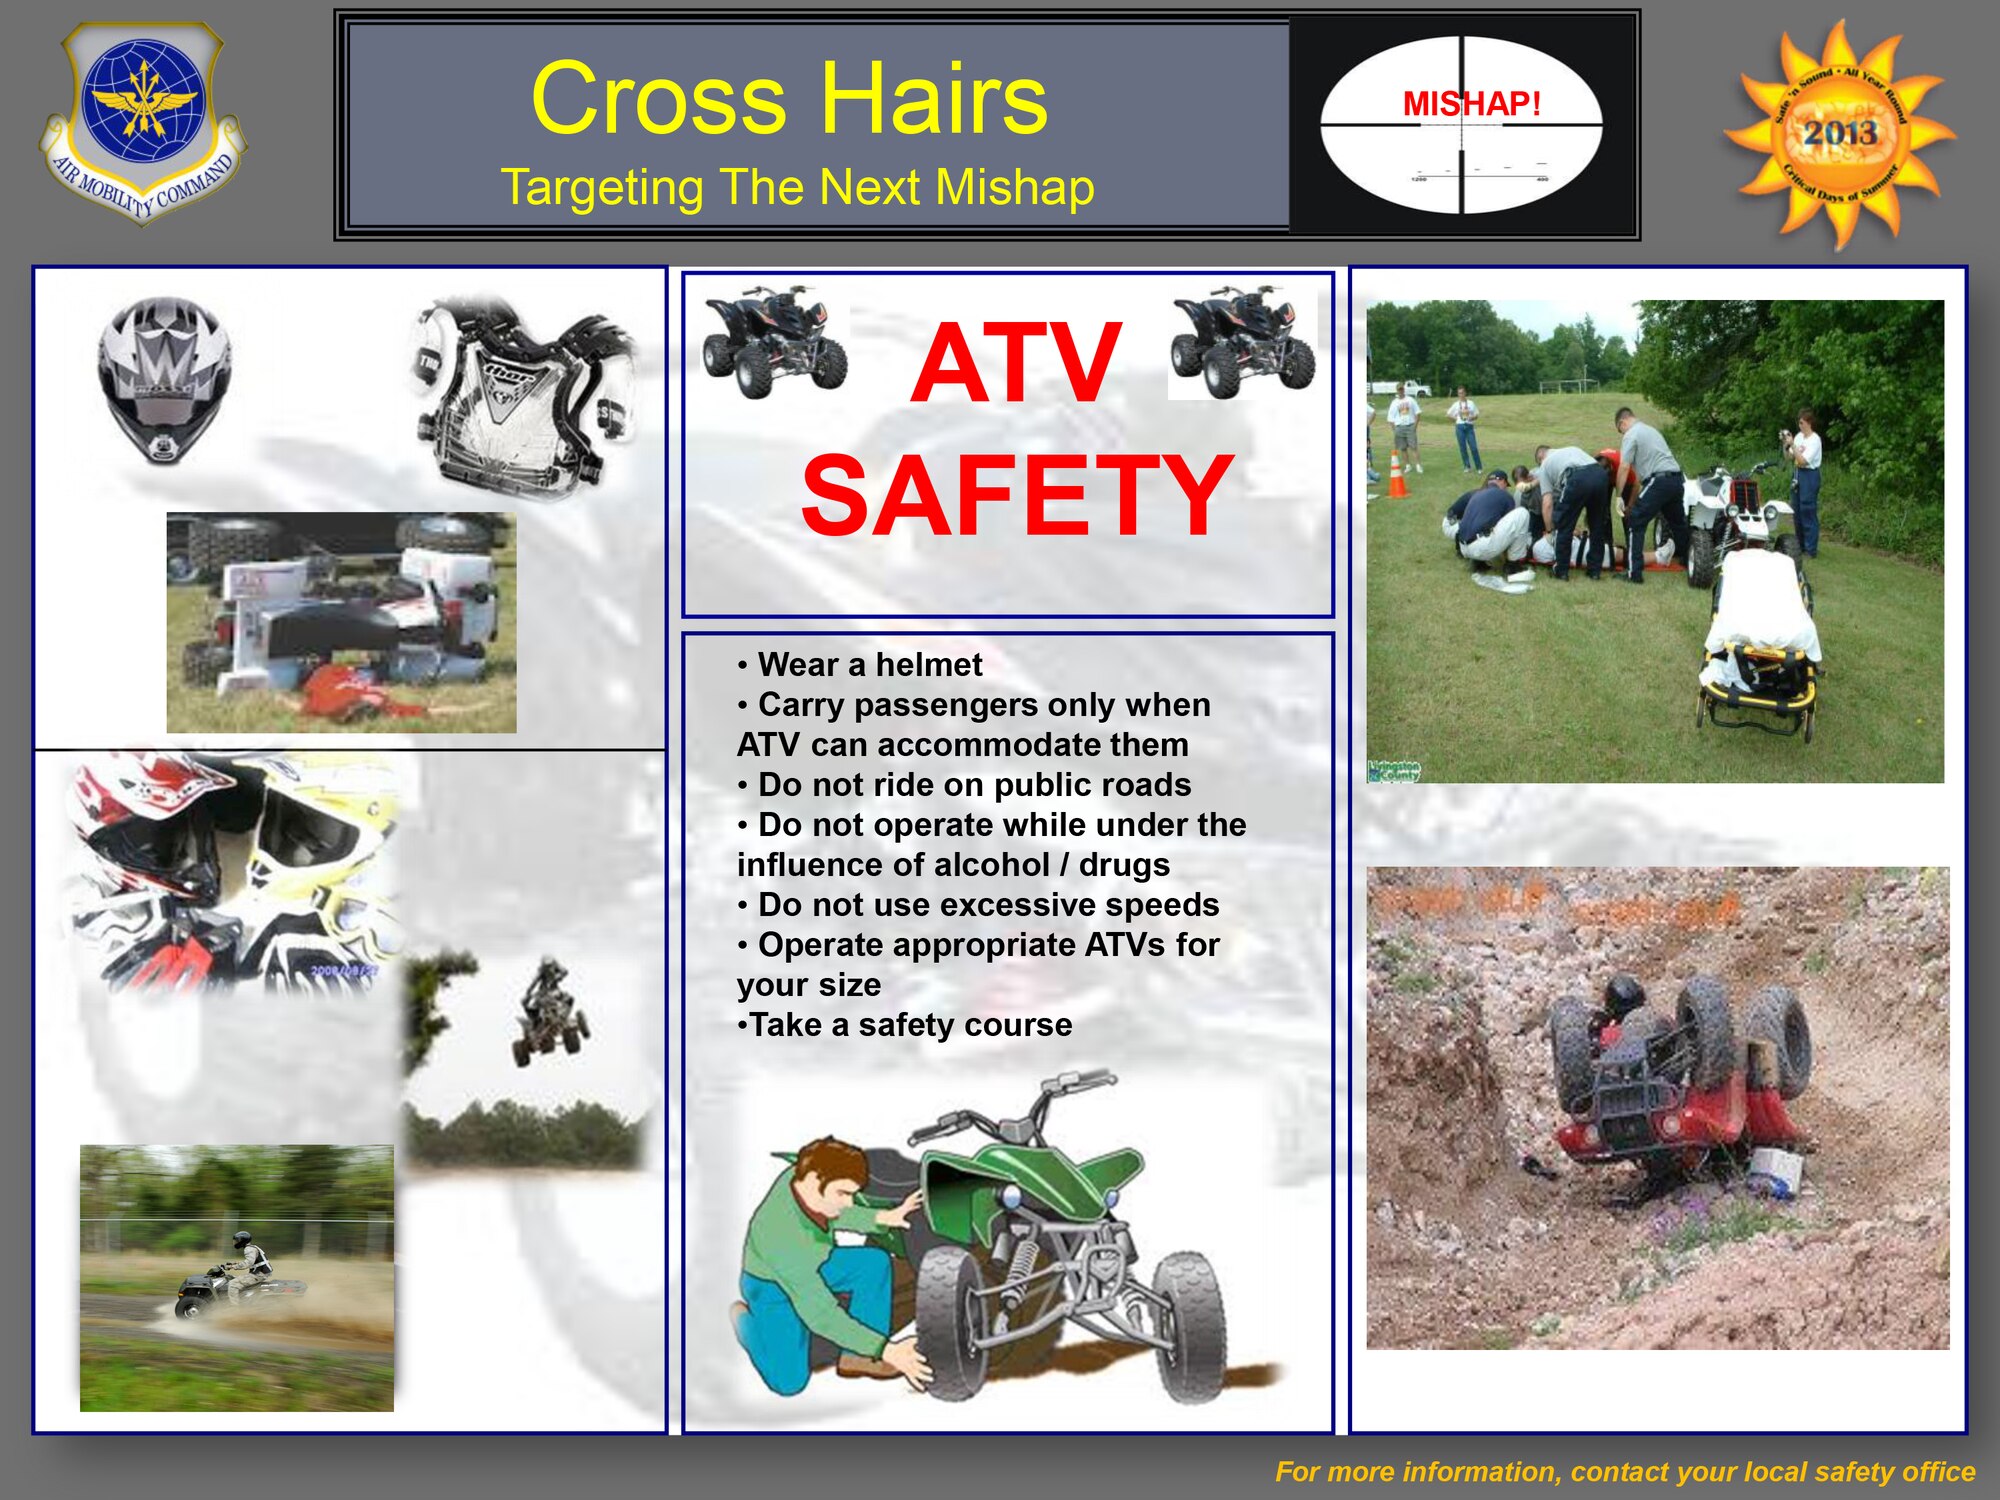 Critical Days of Summer winds down as safety 365 picks up. Remember to be safe this week while riding ATV’s and have a safe Labor Day weekend. 